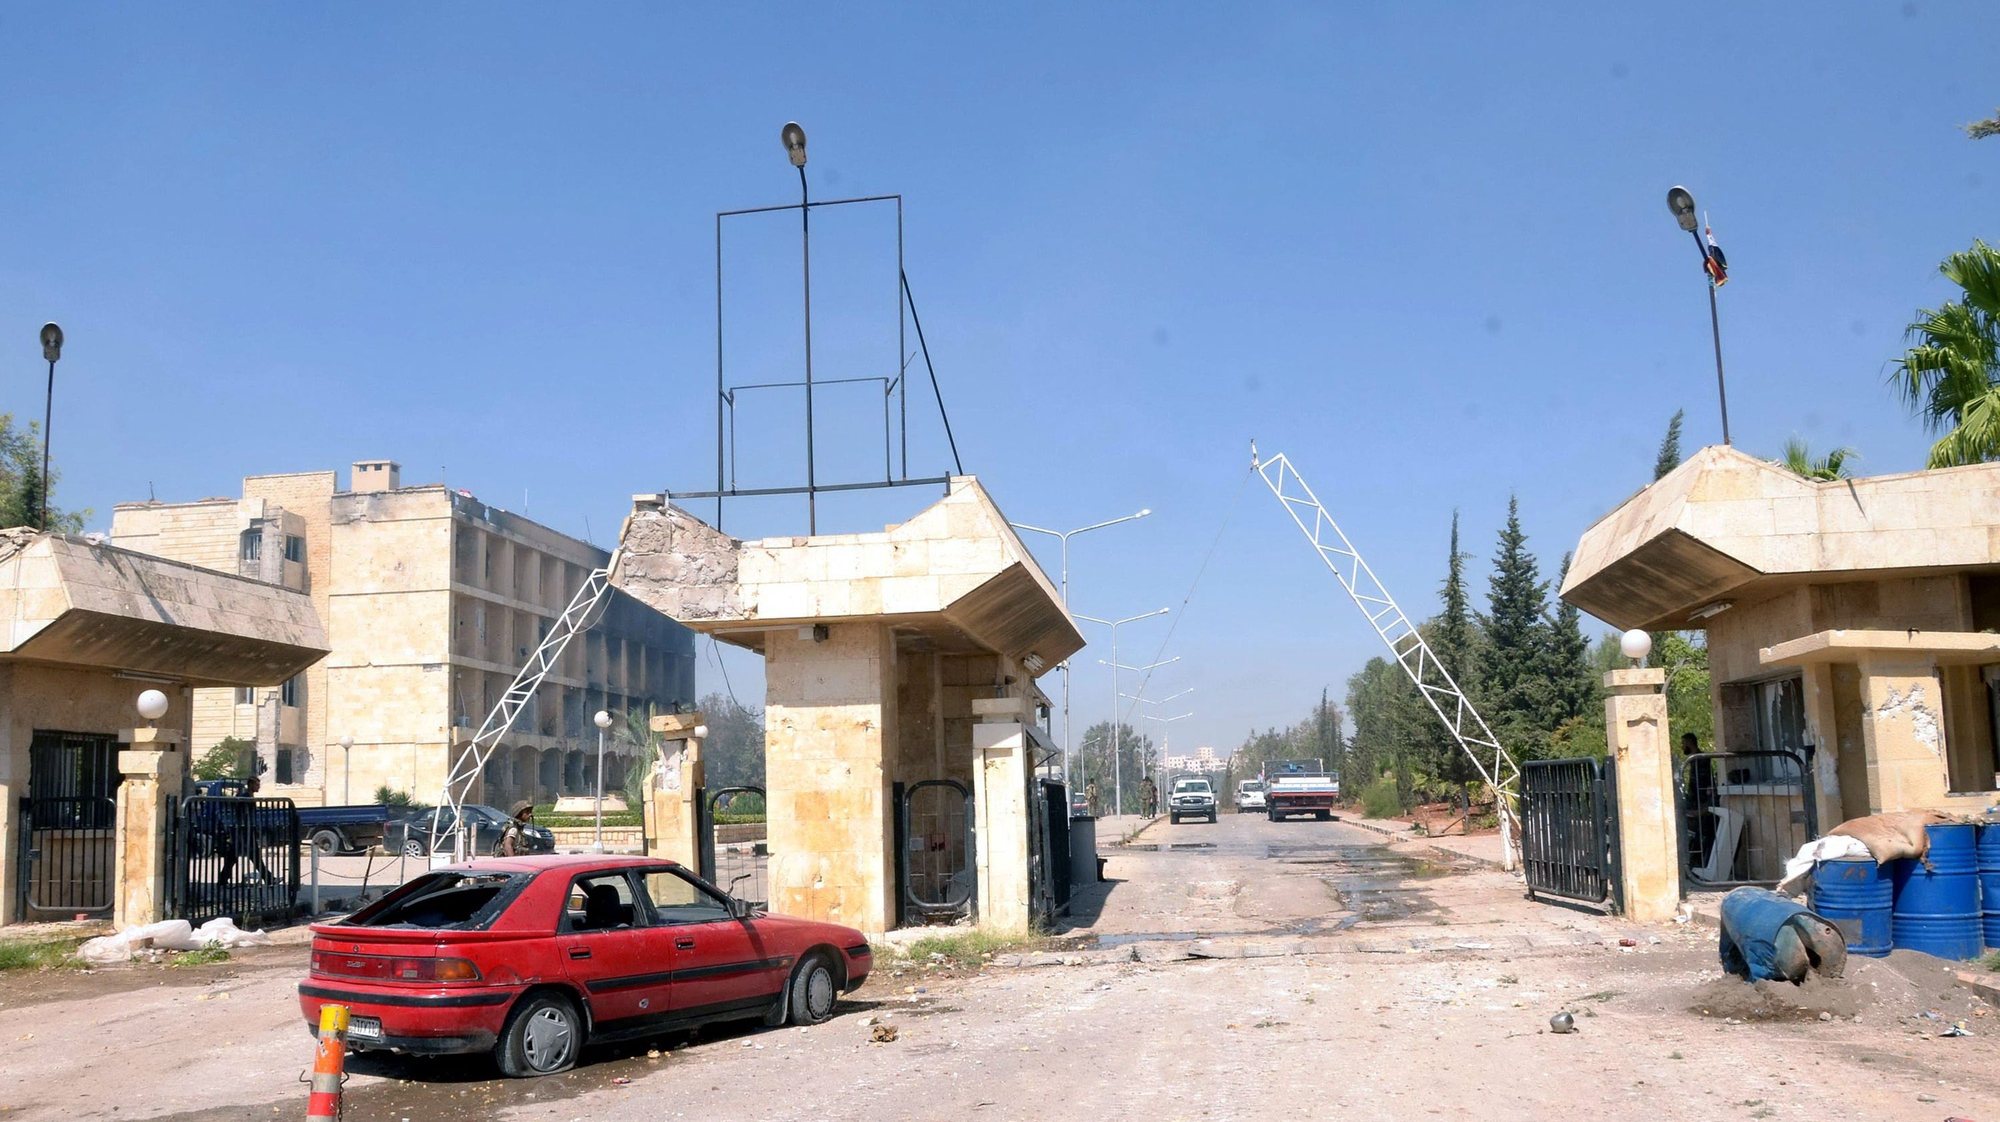 epa03401056 A handout photo made available by Syrian Official News Agency (SANA) shows the damaged entrance of the Scientific Research Center, at al-Zahraa district in Aleppo, in northern Syria, 17 September 2012. According to activists more than 50 people were killed in violence across the country on 17 September mainly in the northern provinces of Aleppo and Idlib.  EPA/SANA HANDOUT  HANDOUT EDITORIAL USE ONLY/NO SALES